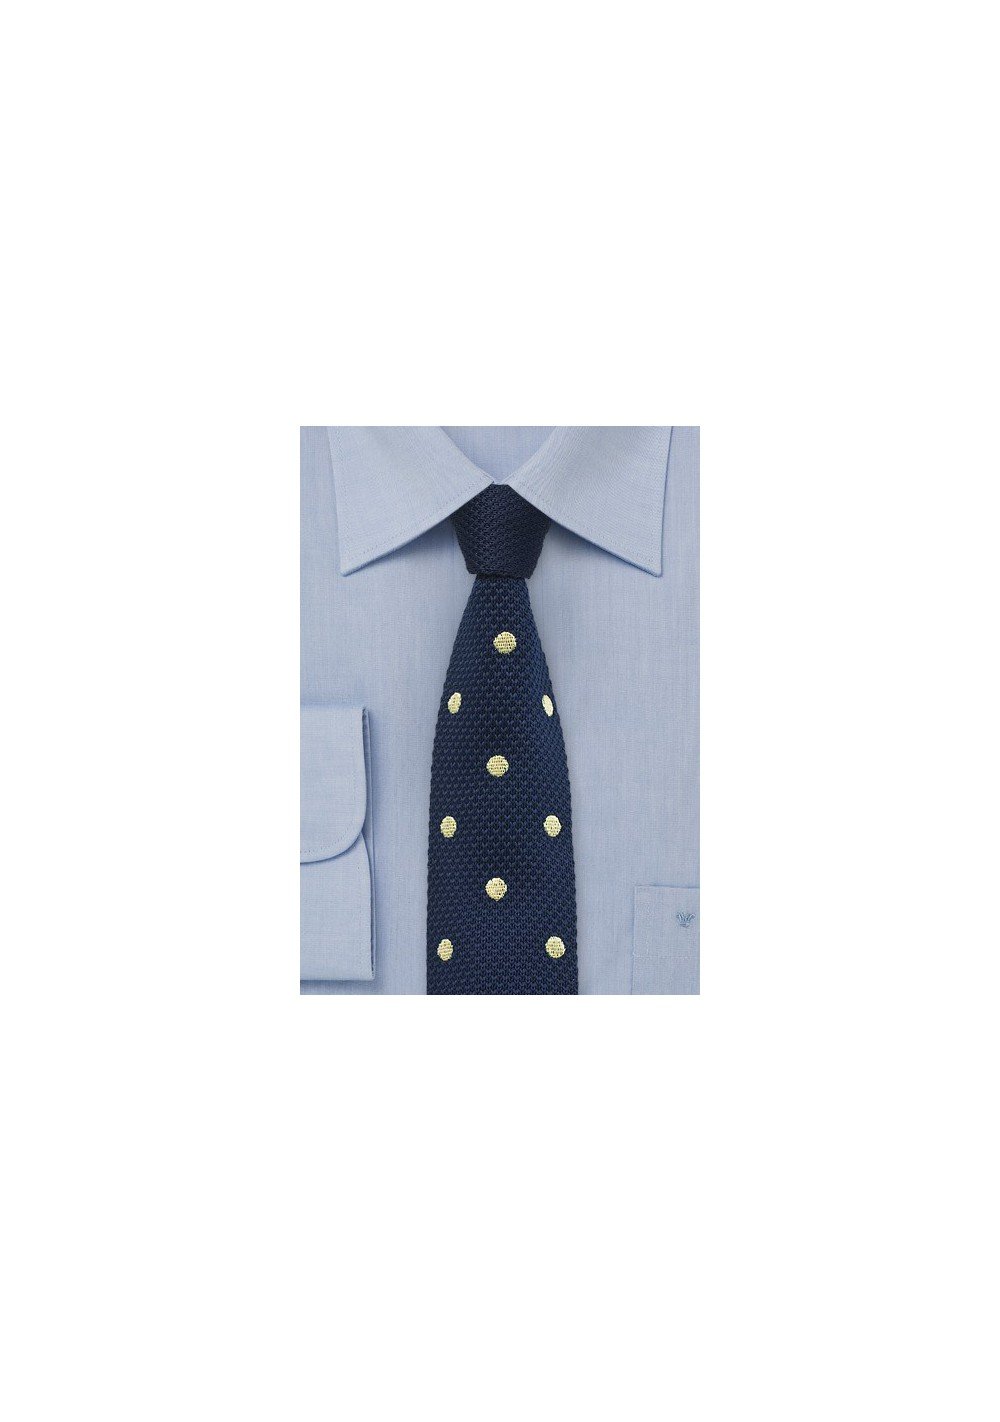 Navy Knit Tie with Yellow Dots